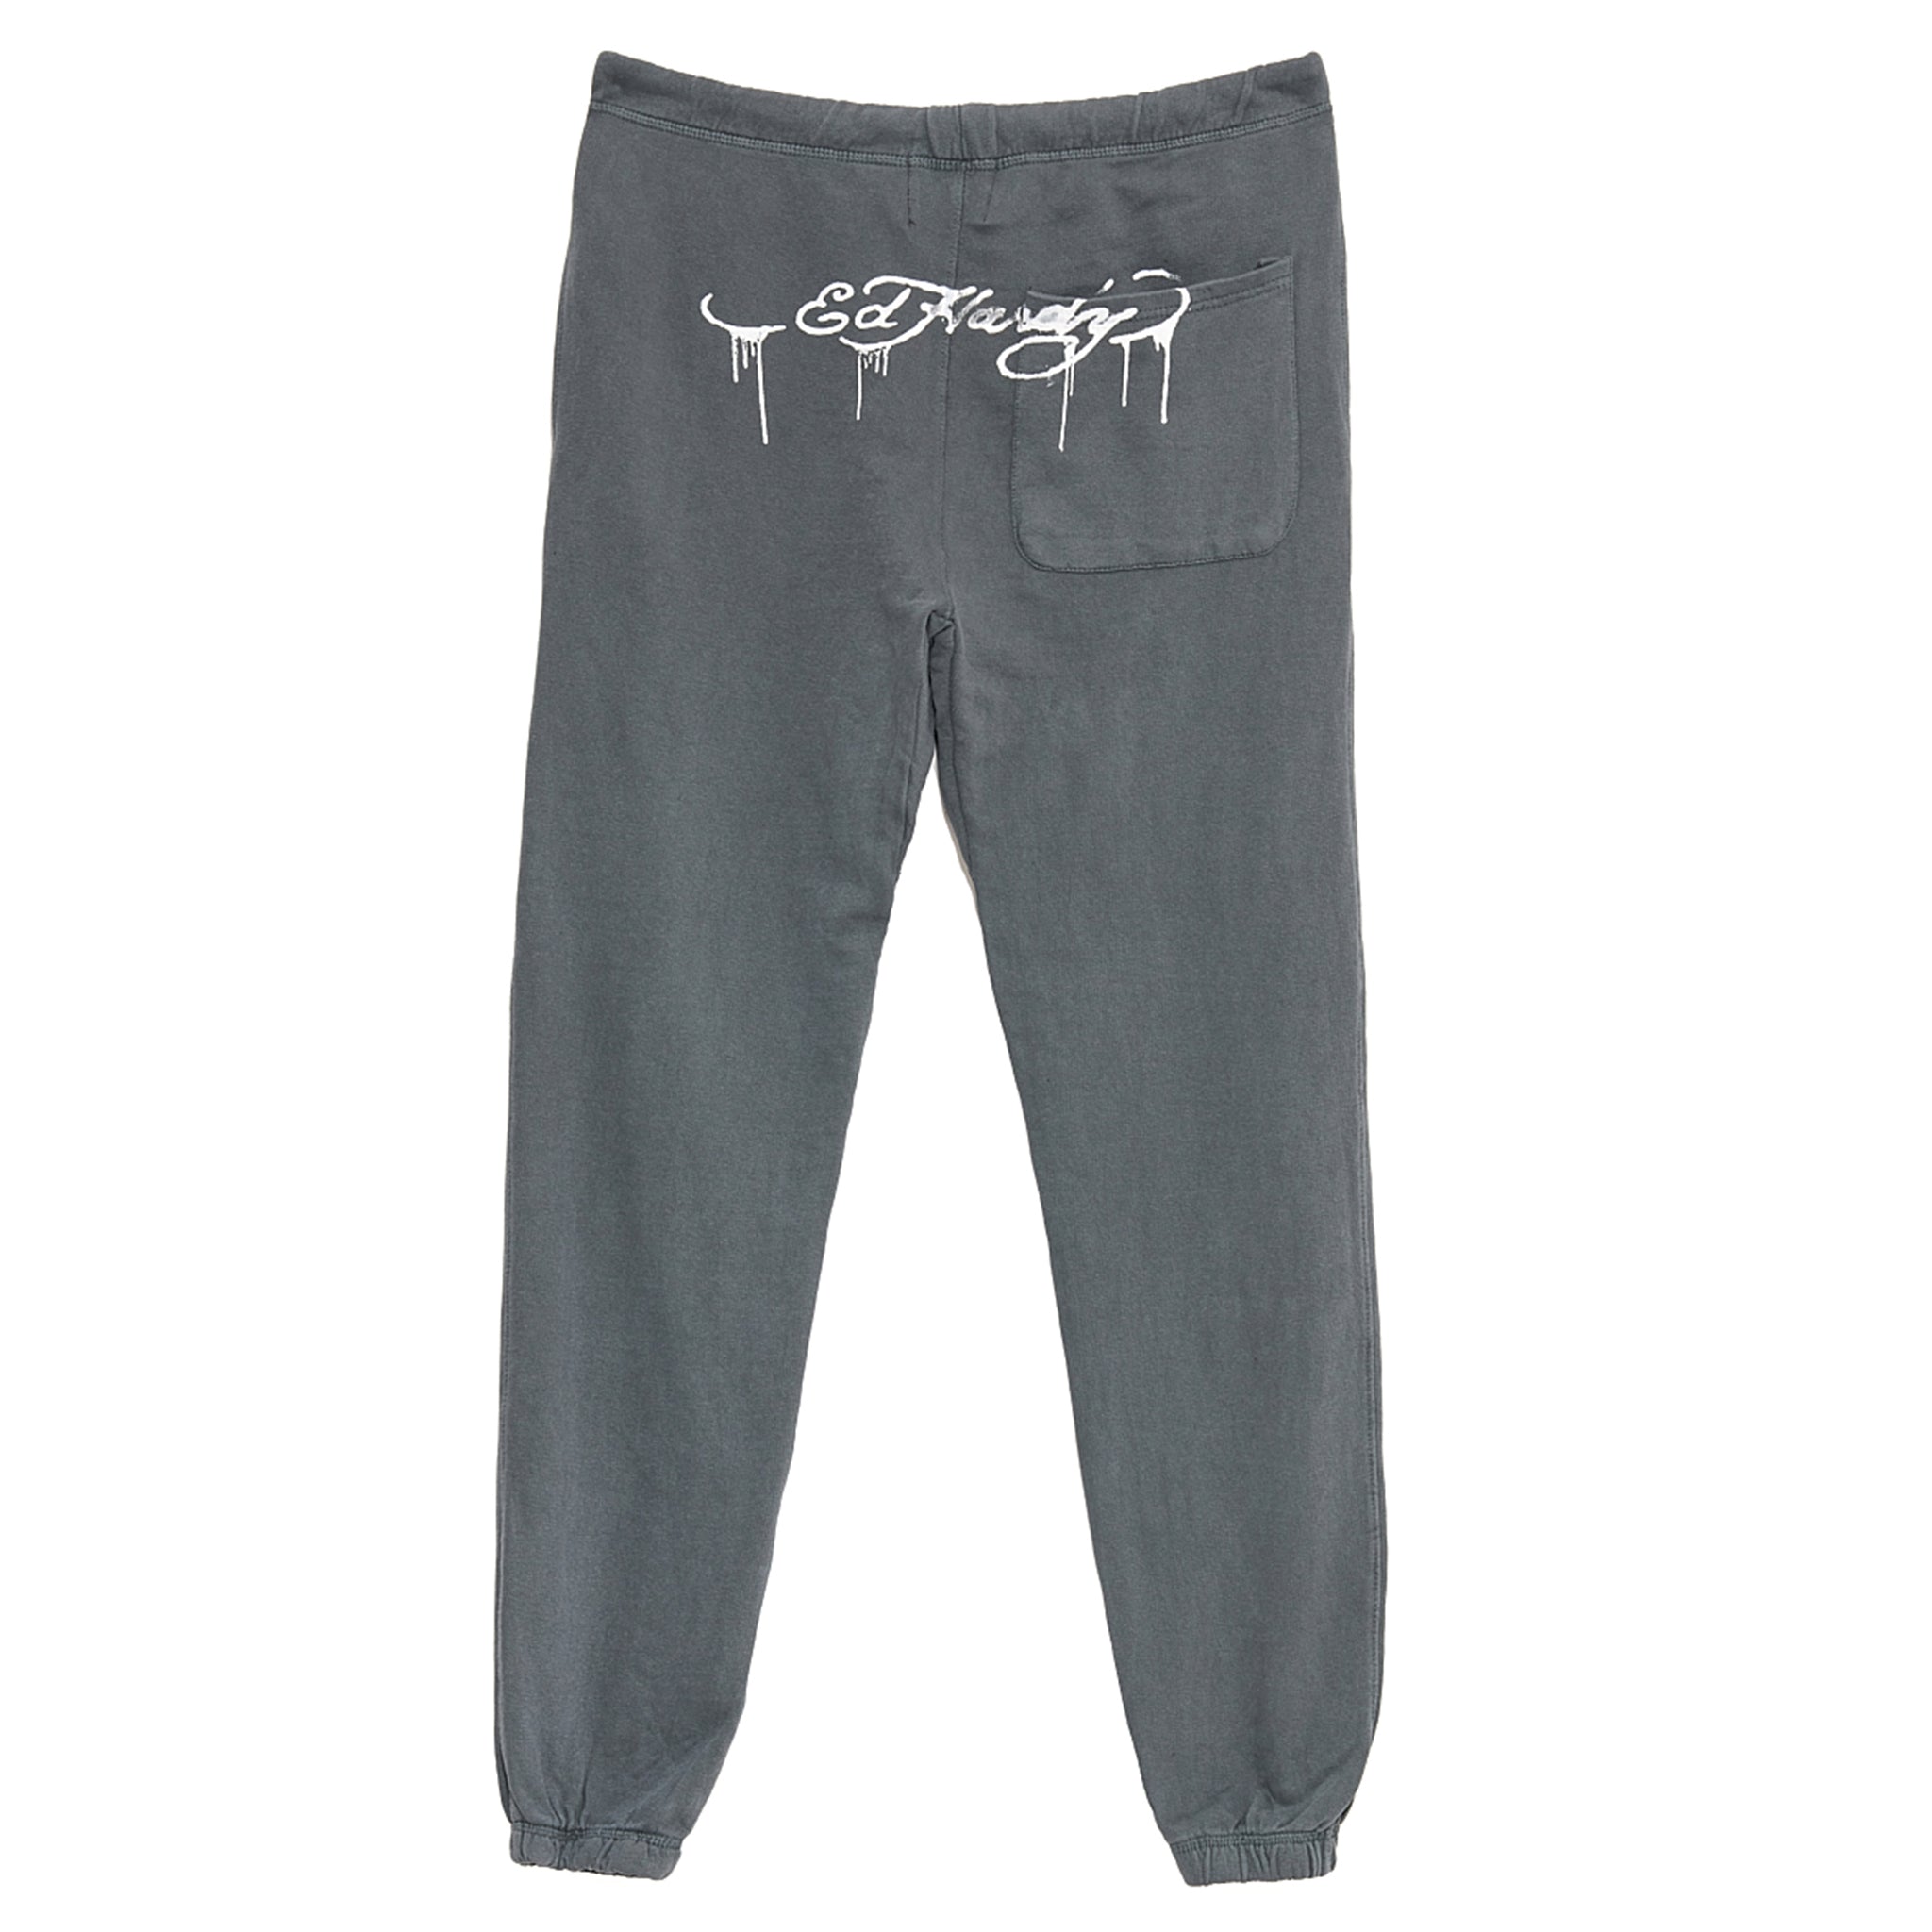 Is That The New Grunge Punk Skull Graphic Sweatpants ??  Graphic sweatpants,  Edgy outfits, Fashion inspo outfits